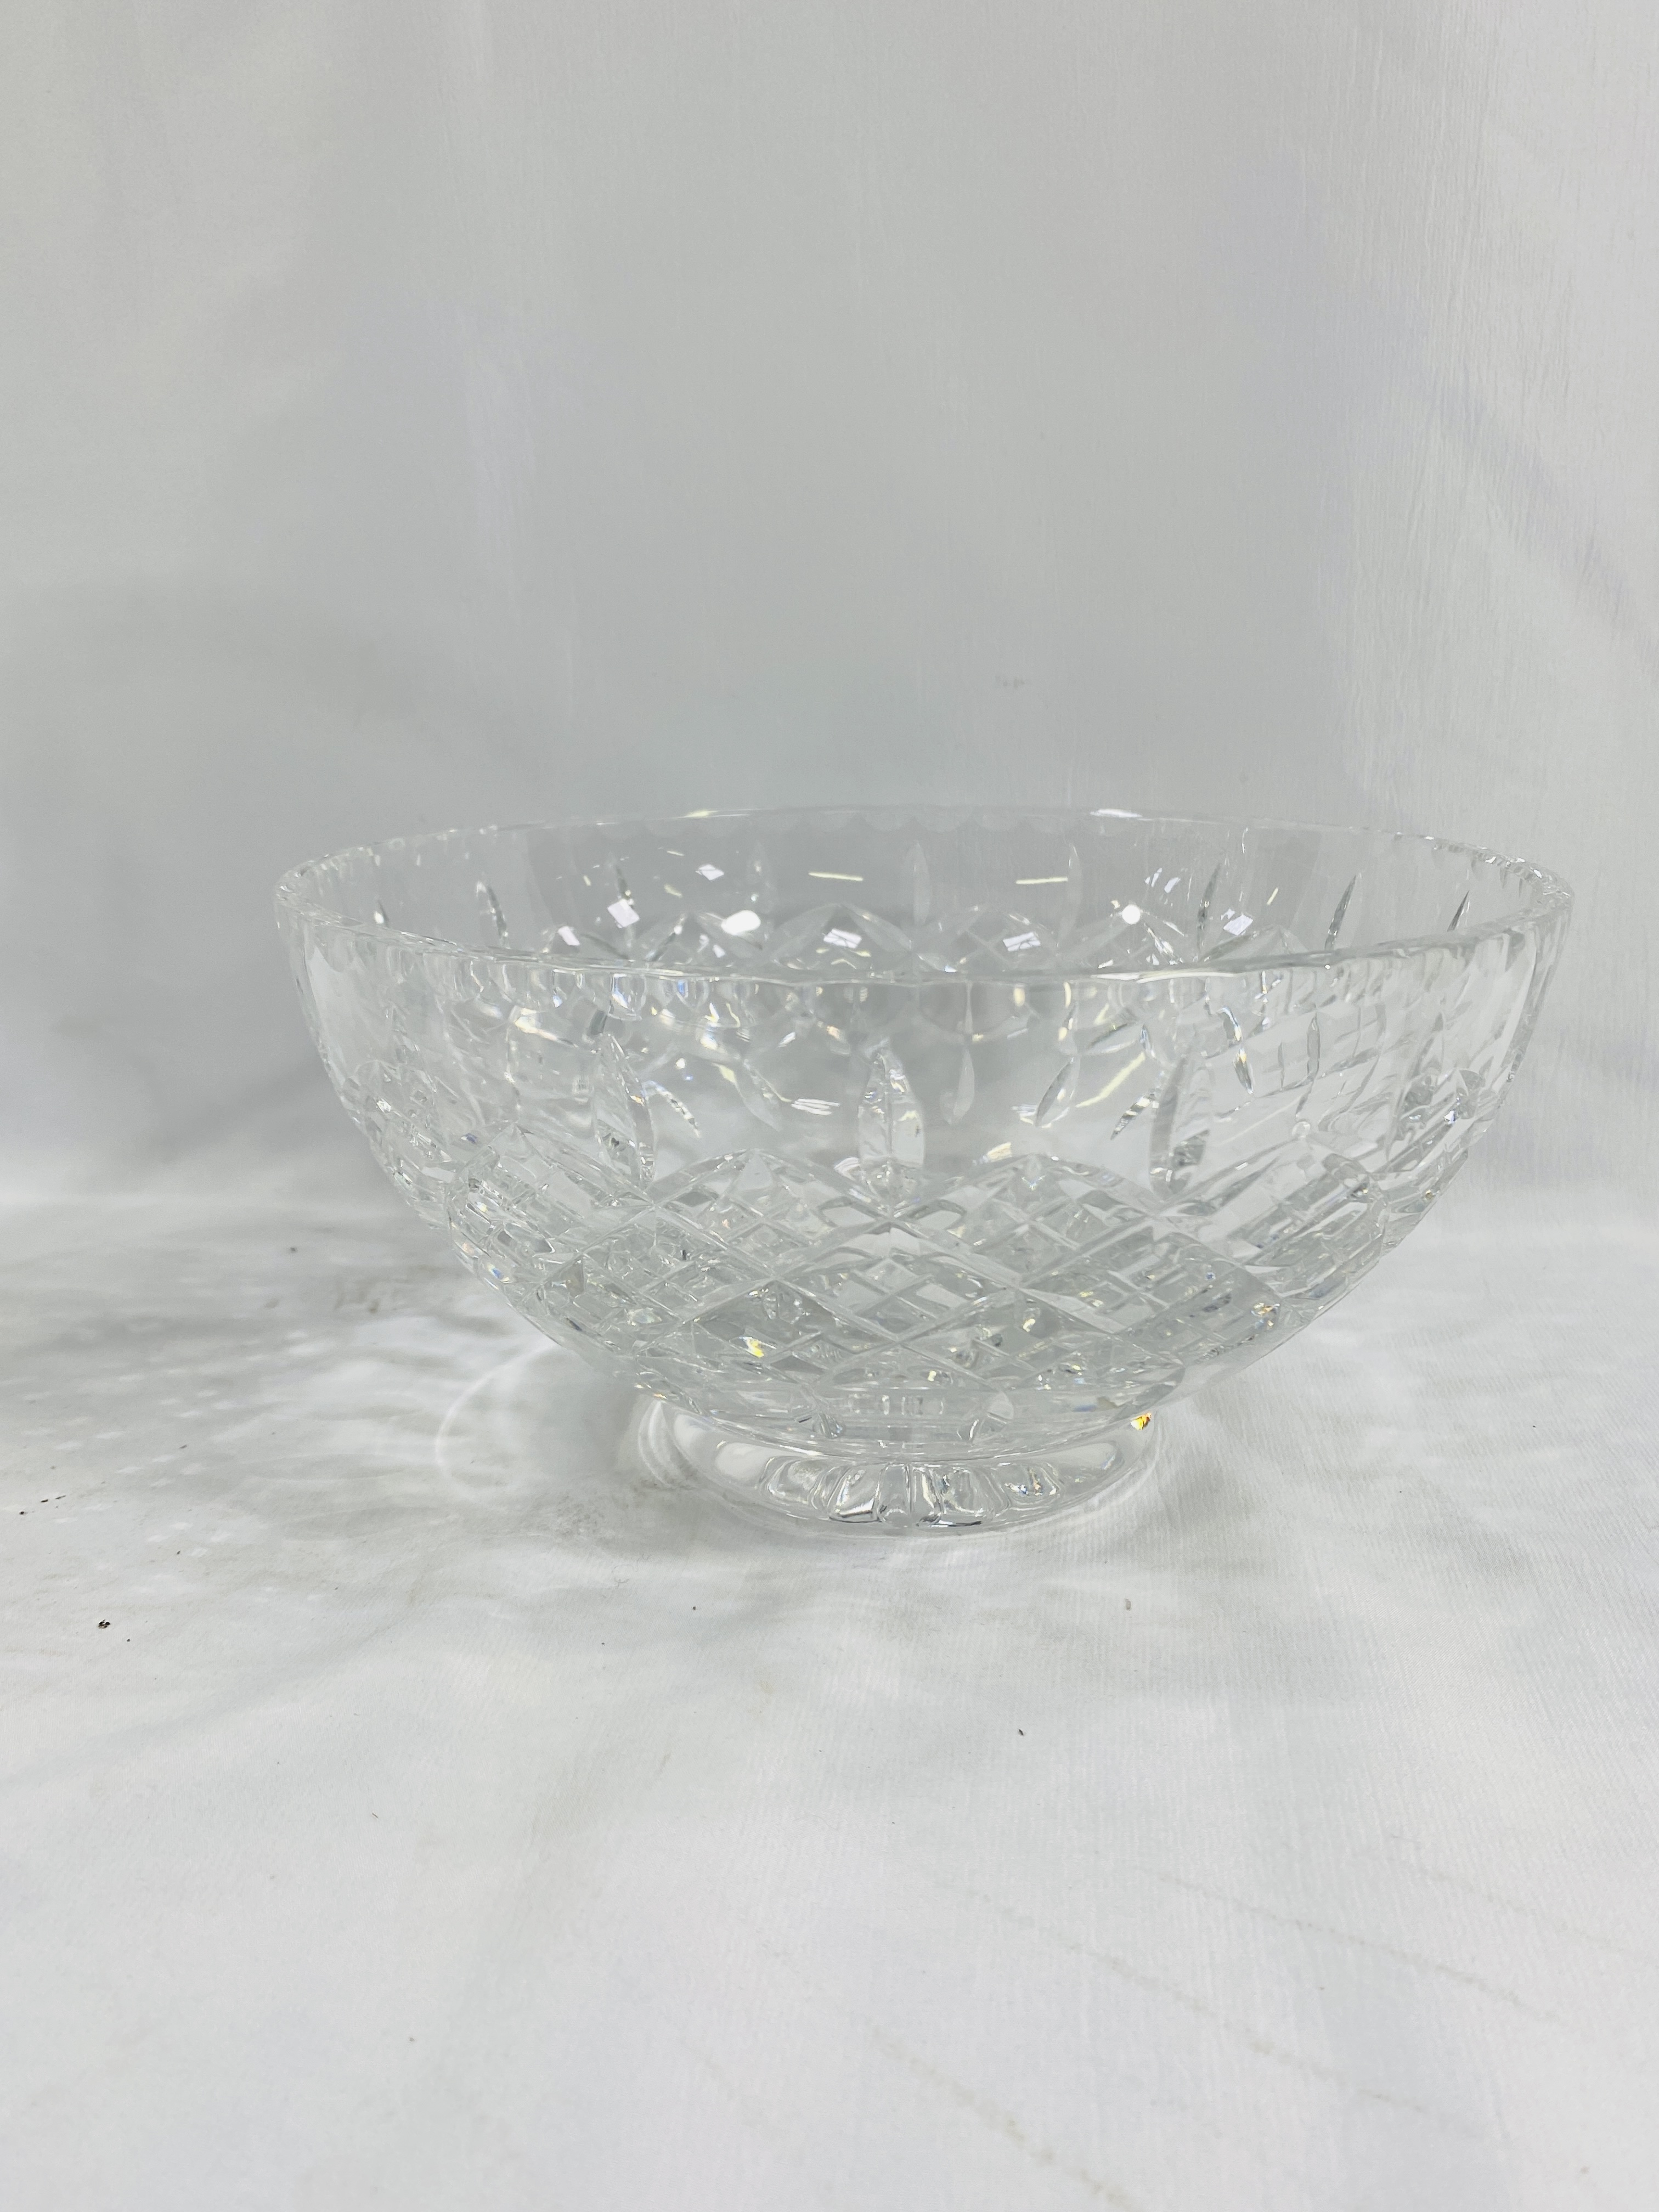 A Royal Doulton cut glass vase and other glassware - Image 5 of 9